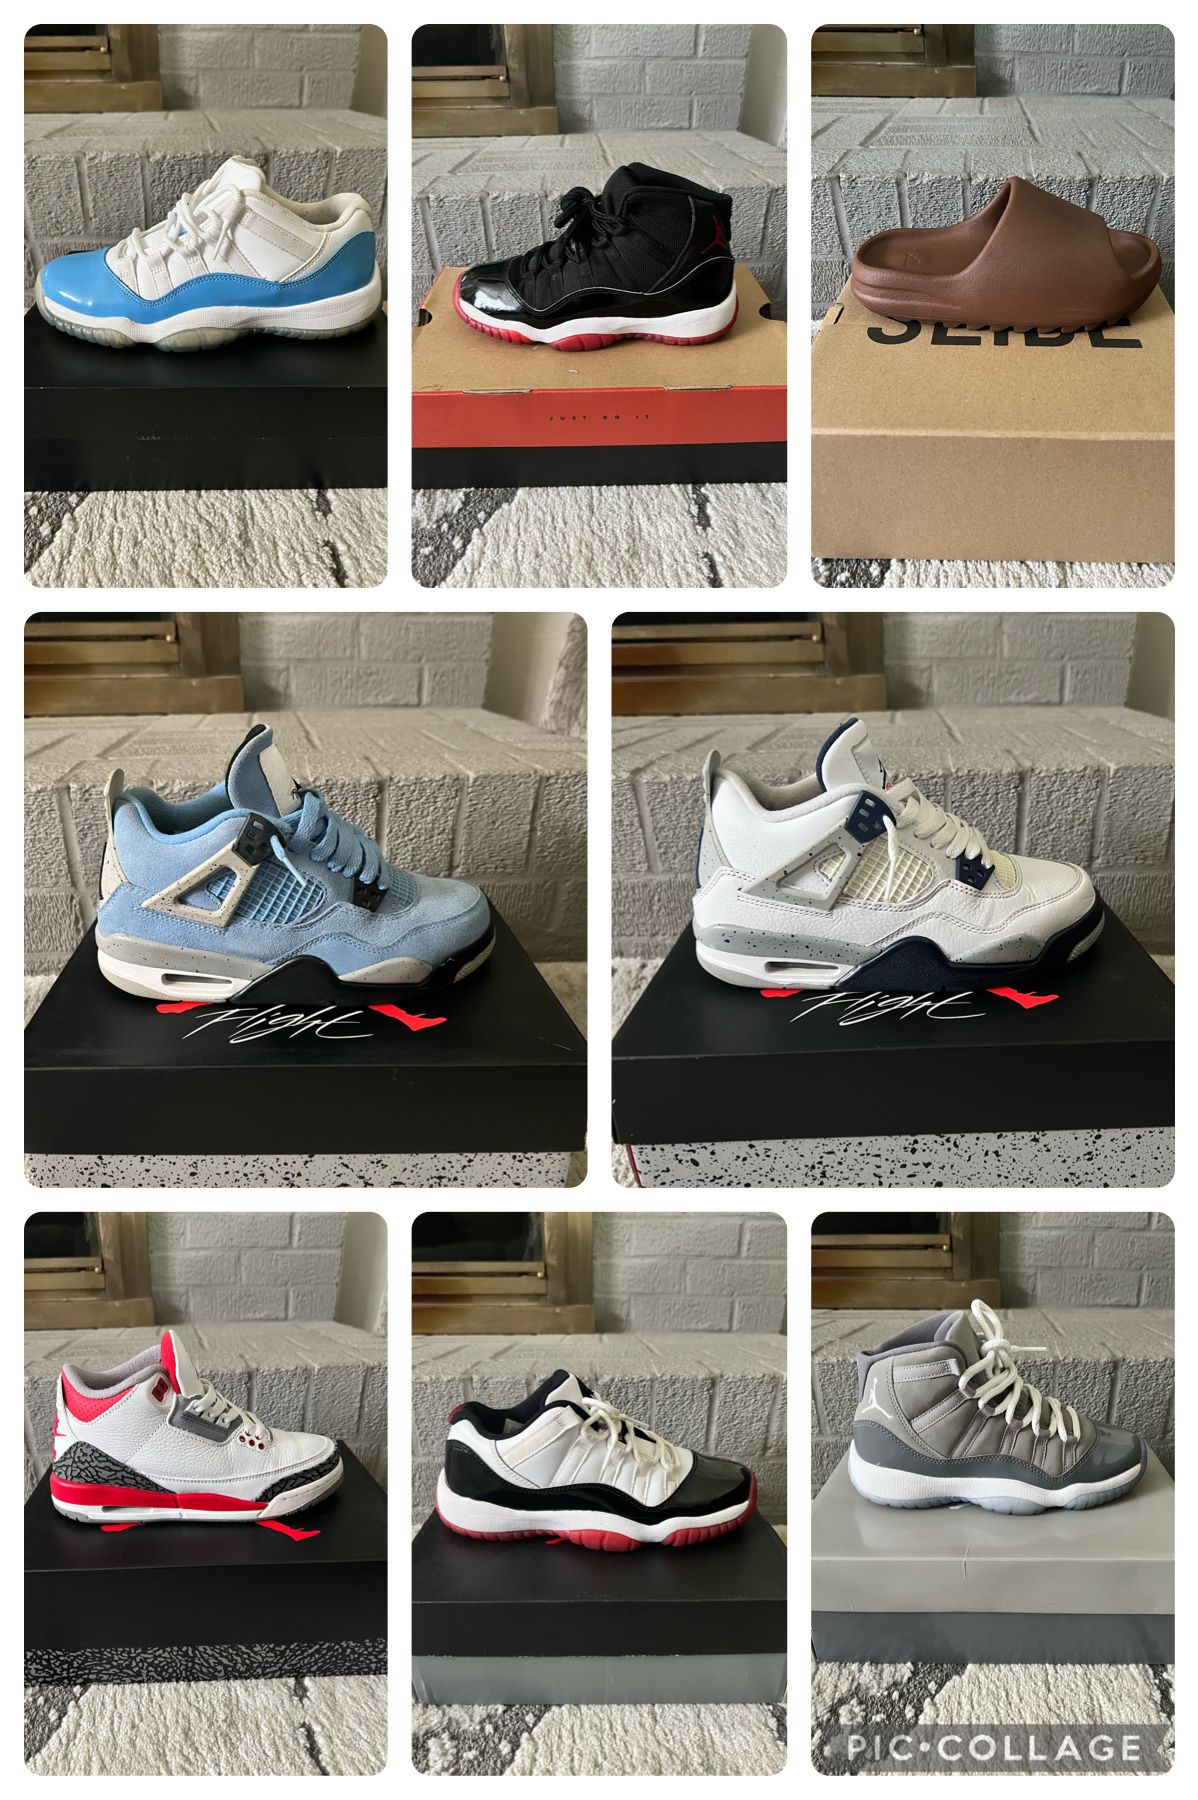 Jordan And Yeezy Shoe Sale For The Low! 